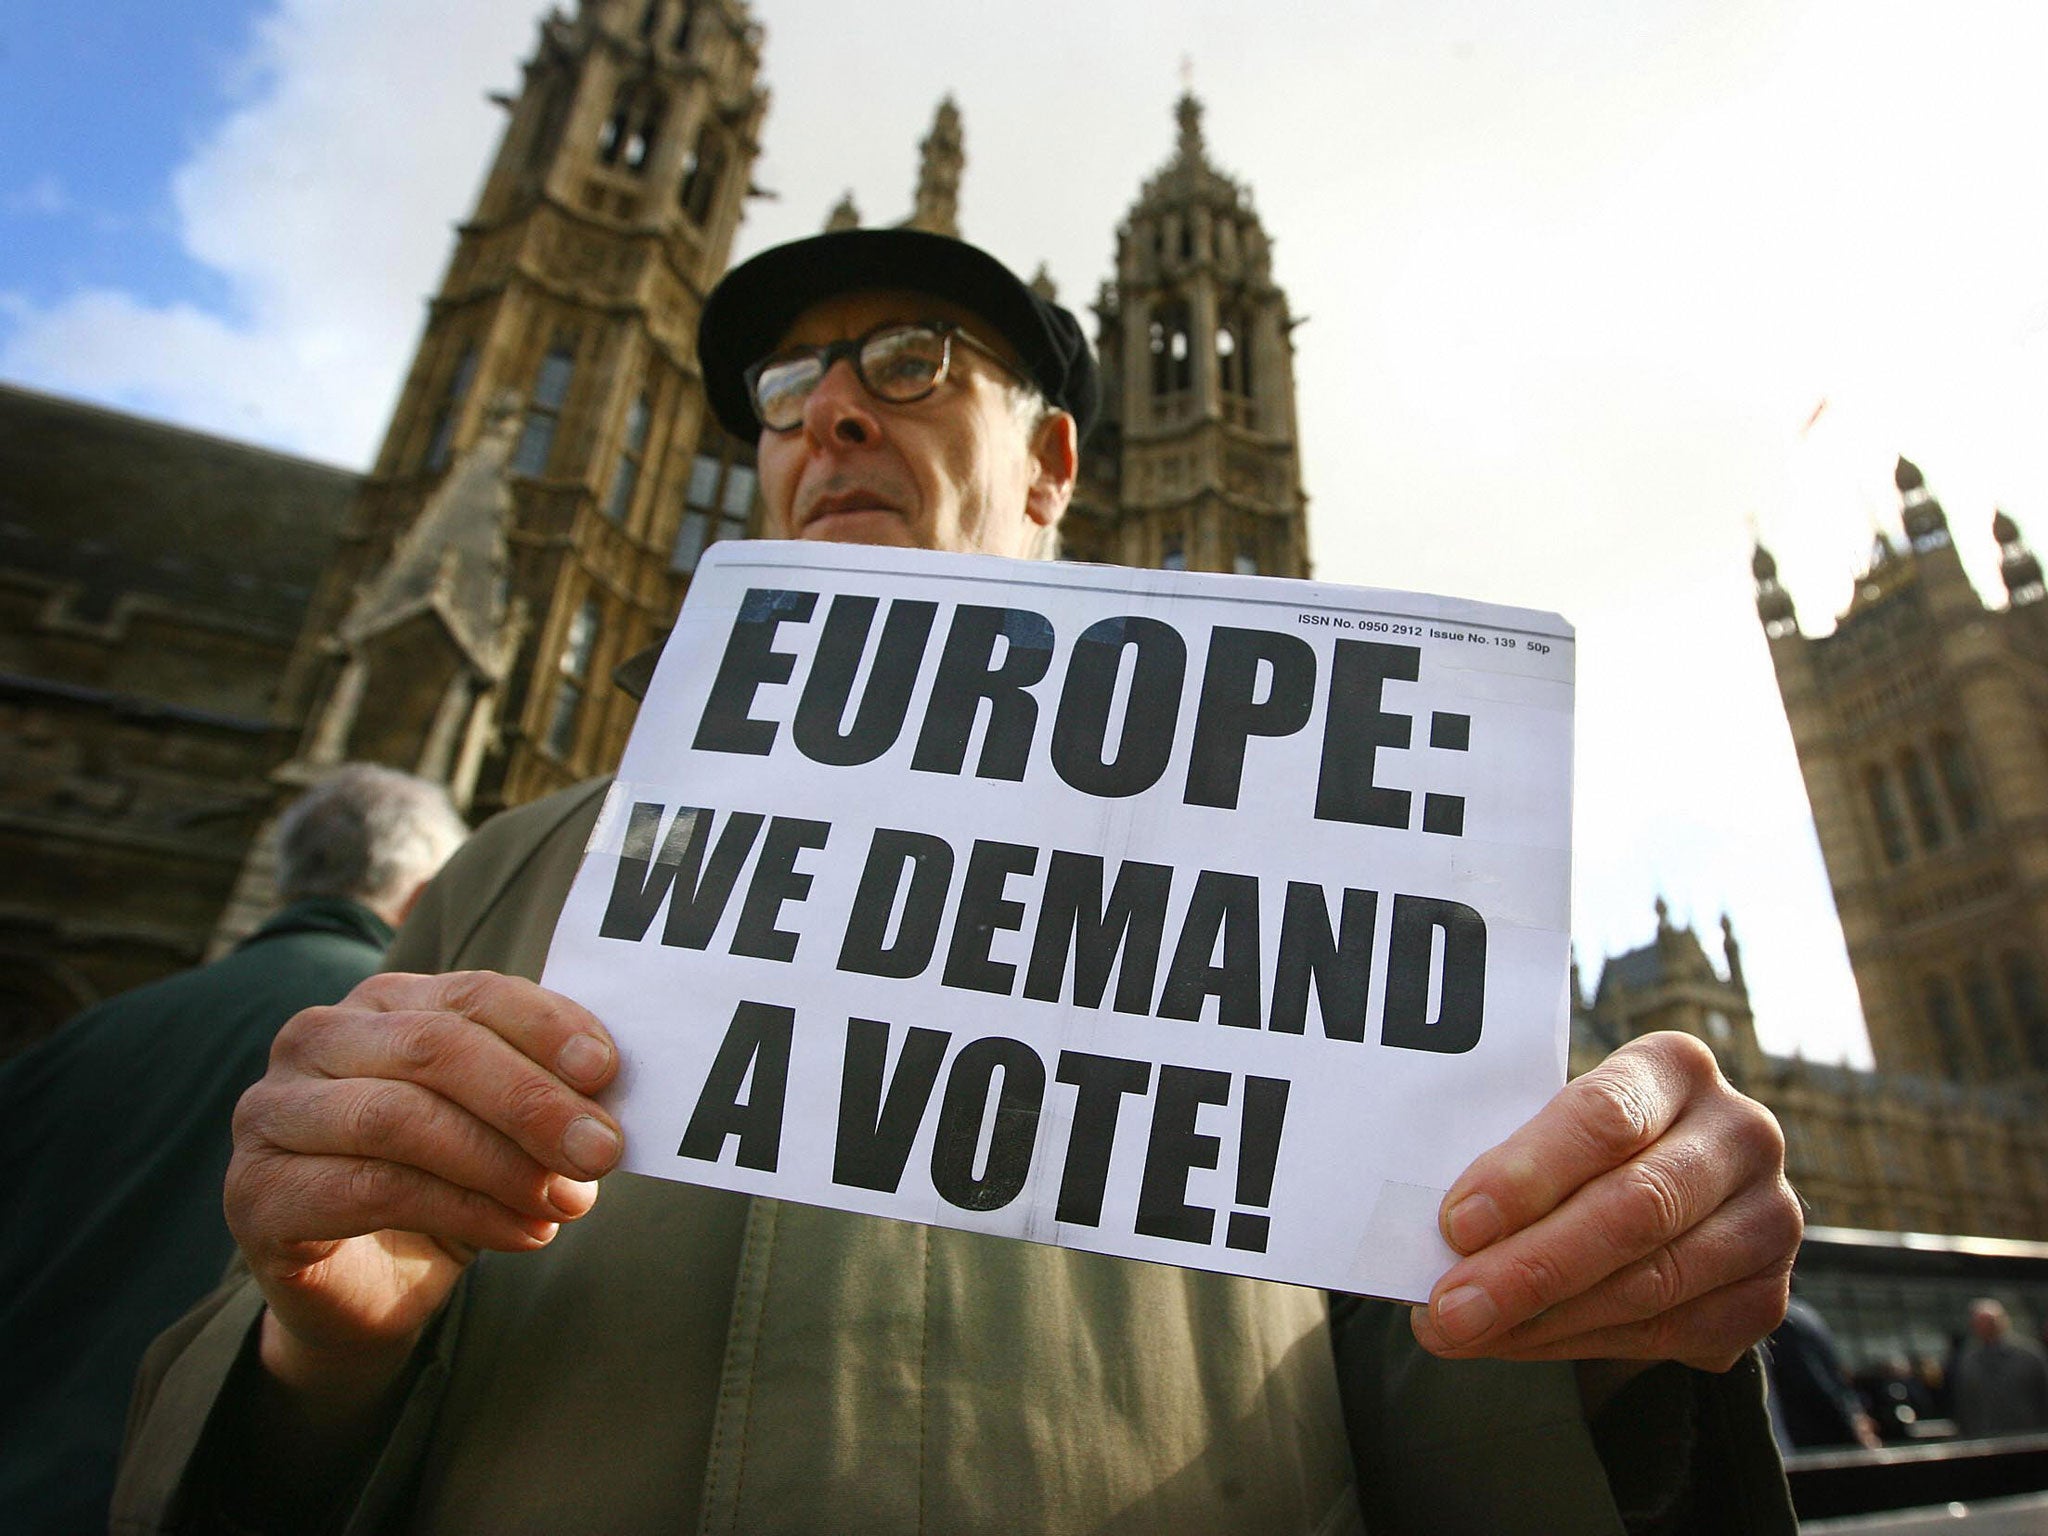 Protestors take part in a demonstration calling for a referendum on the European Union (EU) Lisbon Treaty, outside the Houses of Parliament in central London, on February 27, 2008.